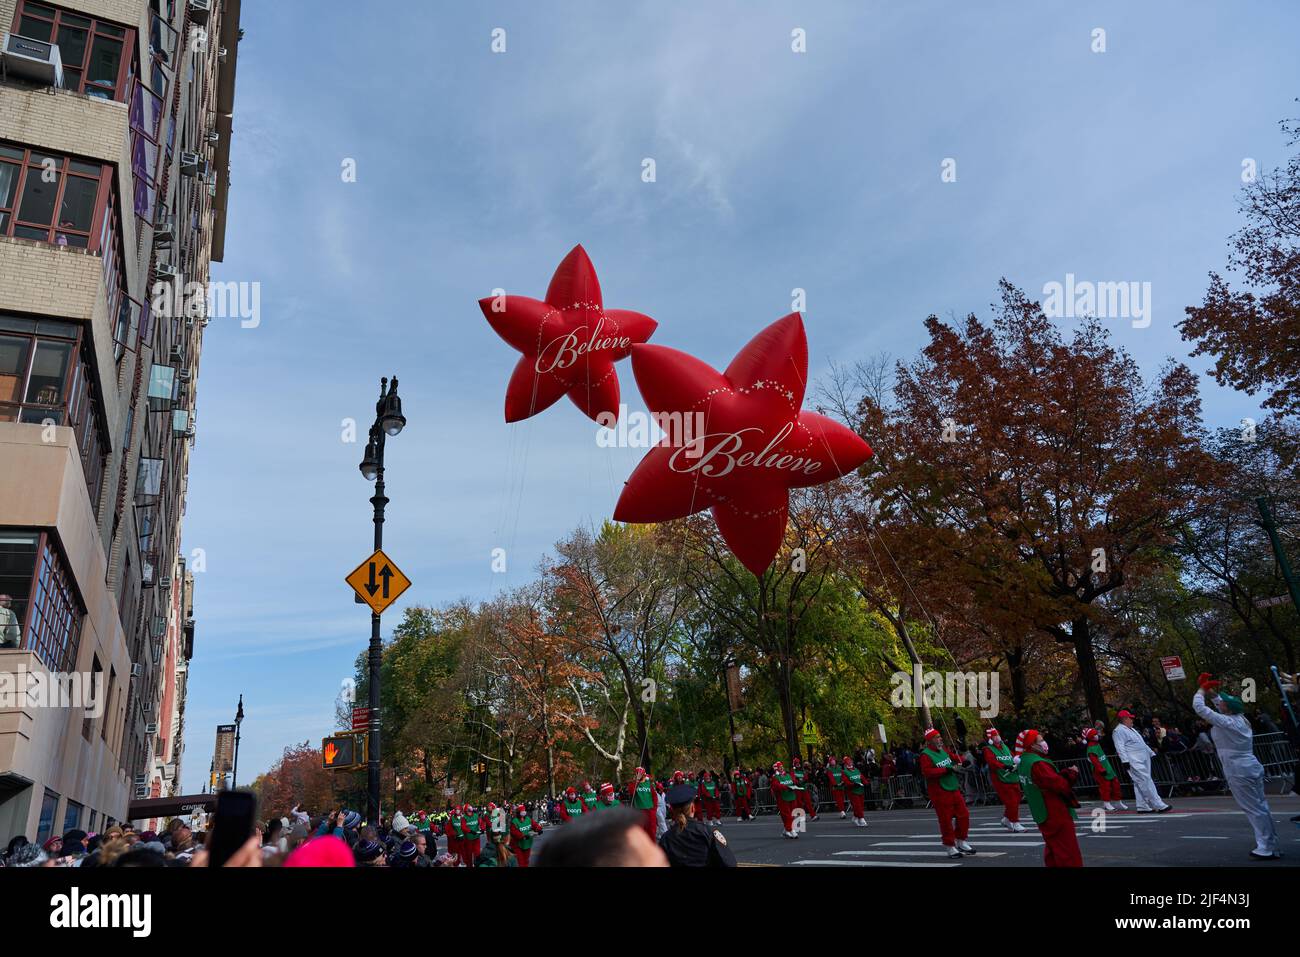 Manhattan, USA - 24. November 2021: Macy's Parade Balloons, Red Stars with Believe text. Thanksgiving Parade Stock Photo